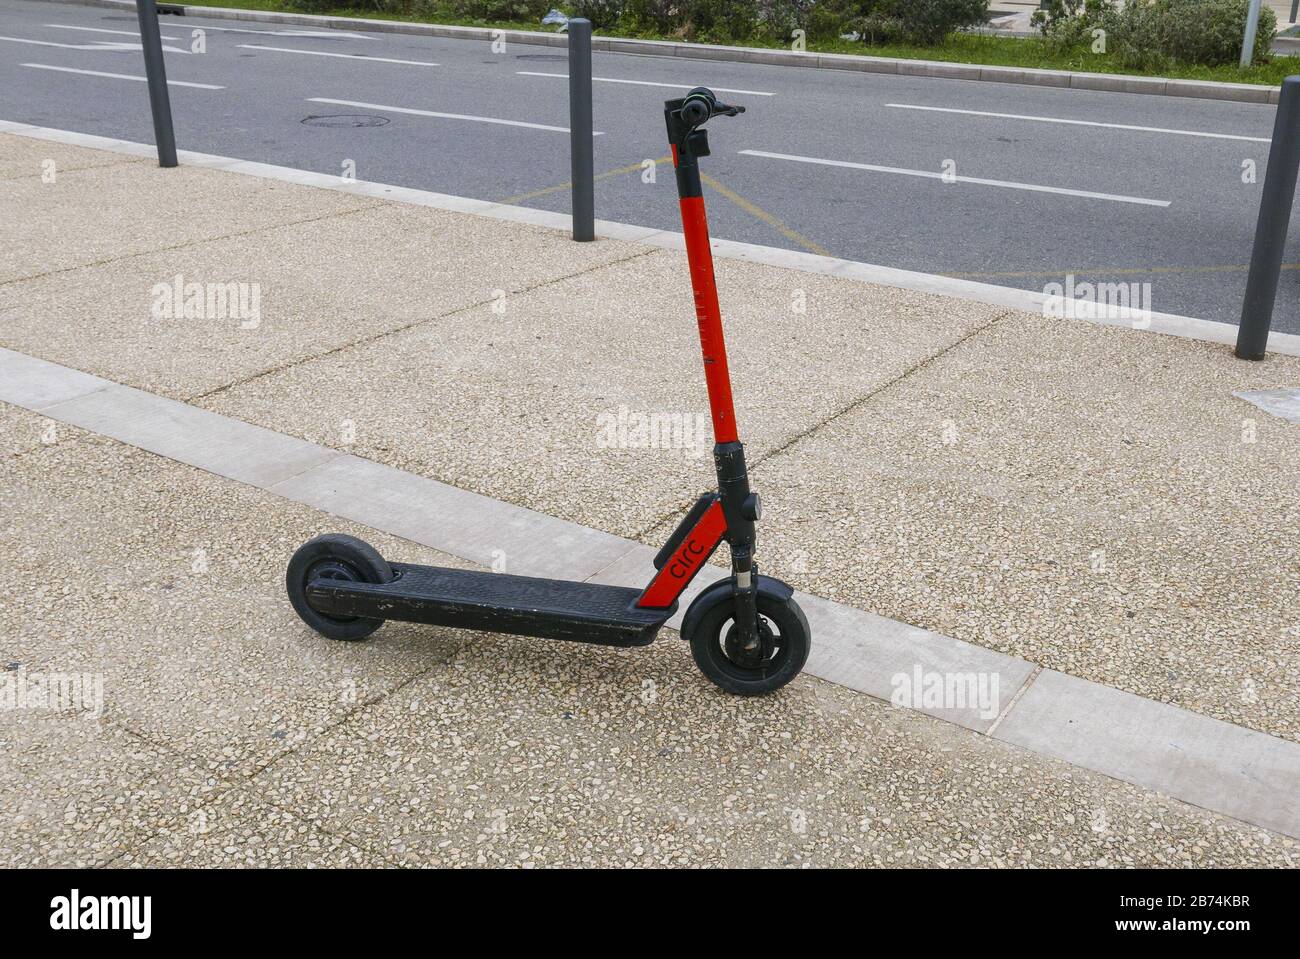 MARSEILLE, FRANCE - Nov 15, 2019: Circ electric scooter parked on the streets of Marseille, France, Europe Stock Photo